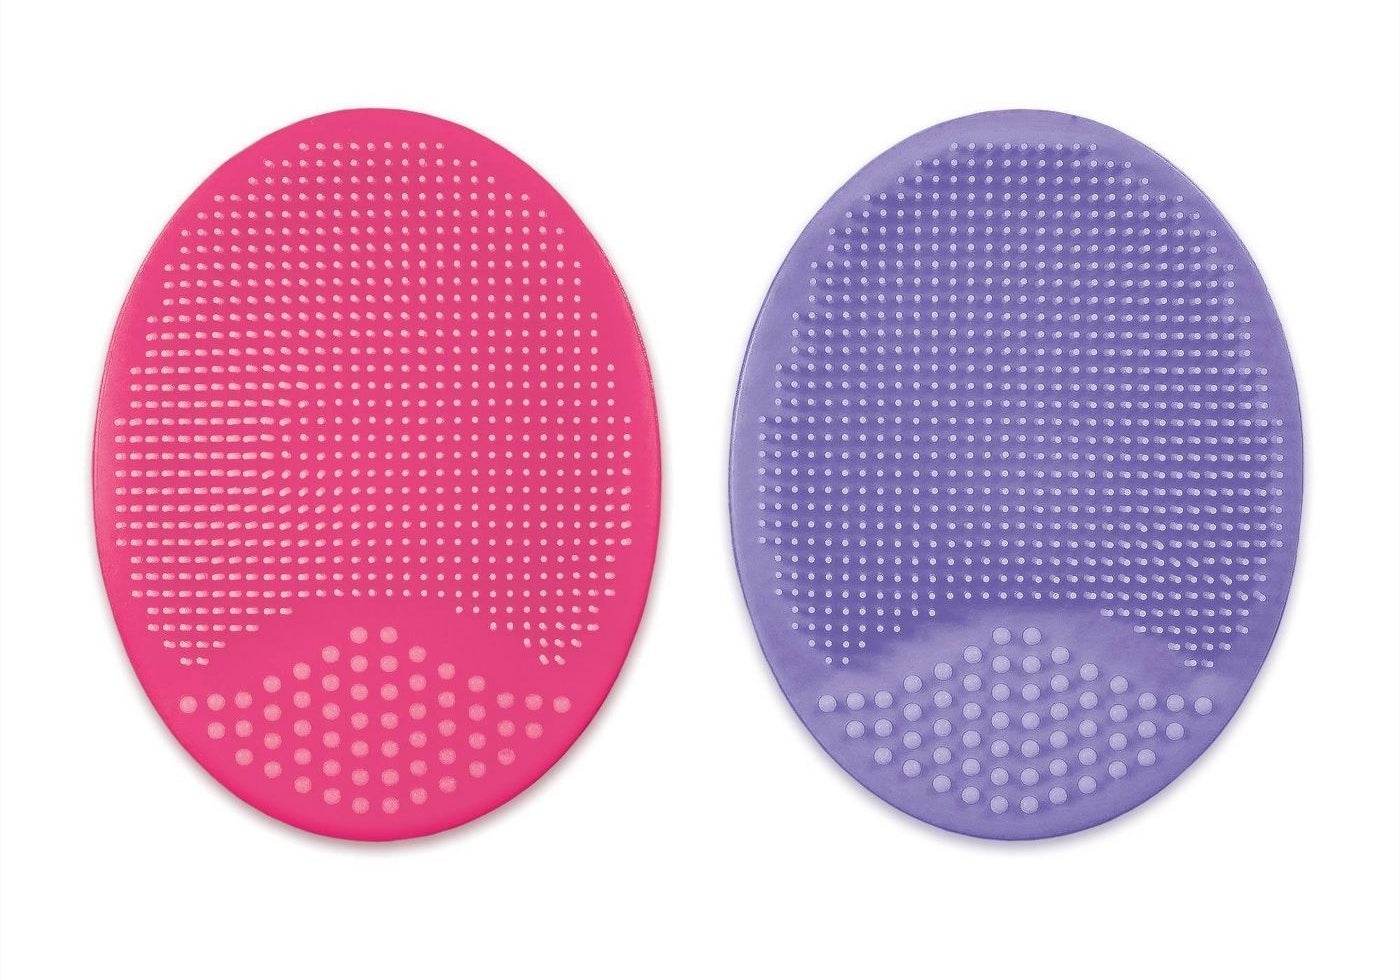 The pack of beauty skin scrubbers